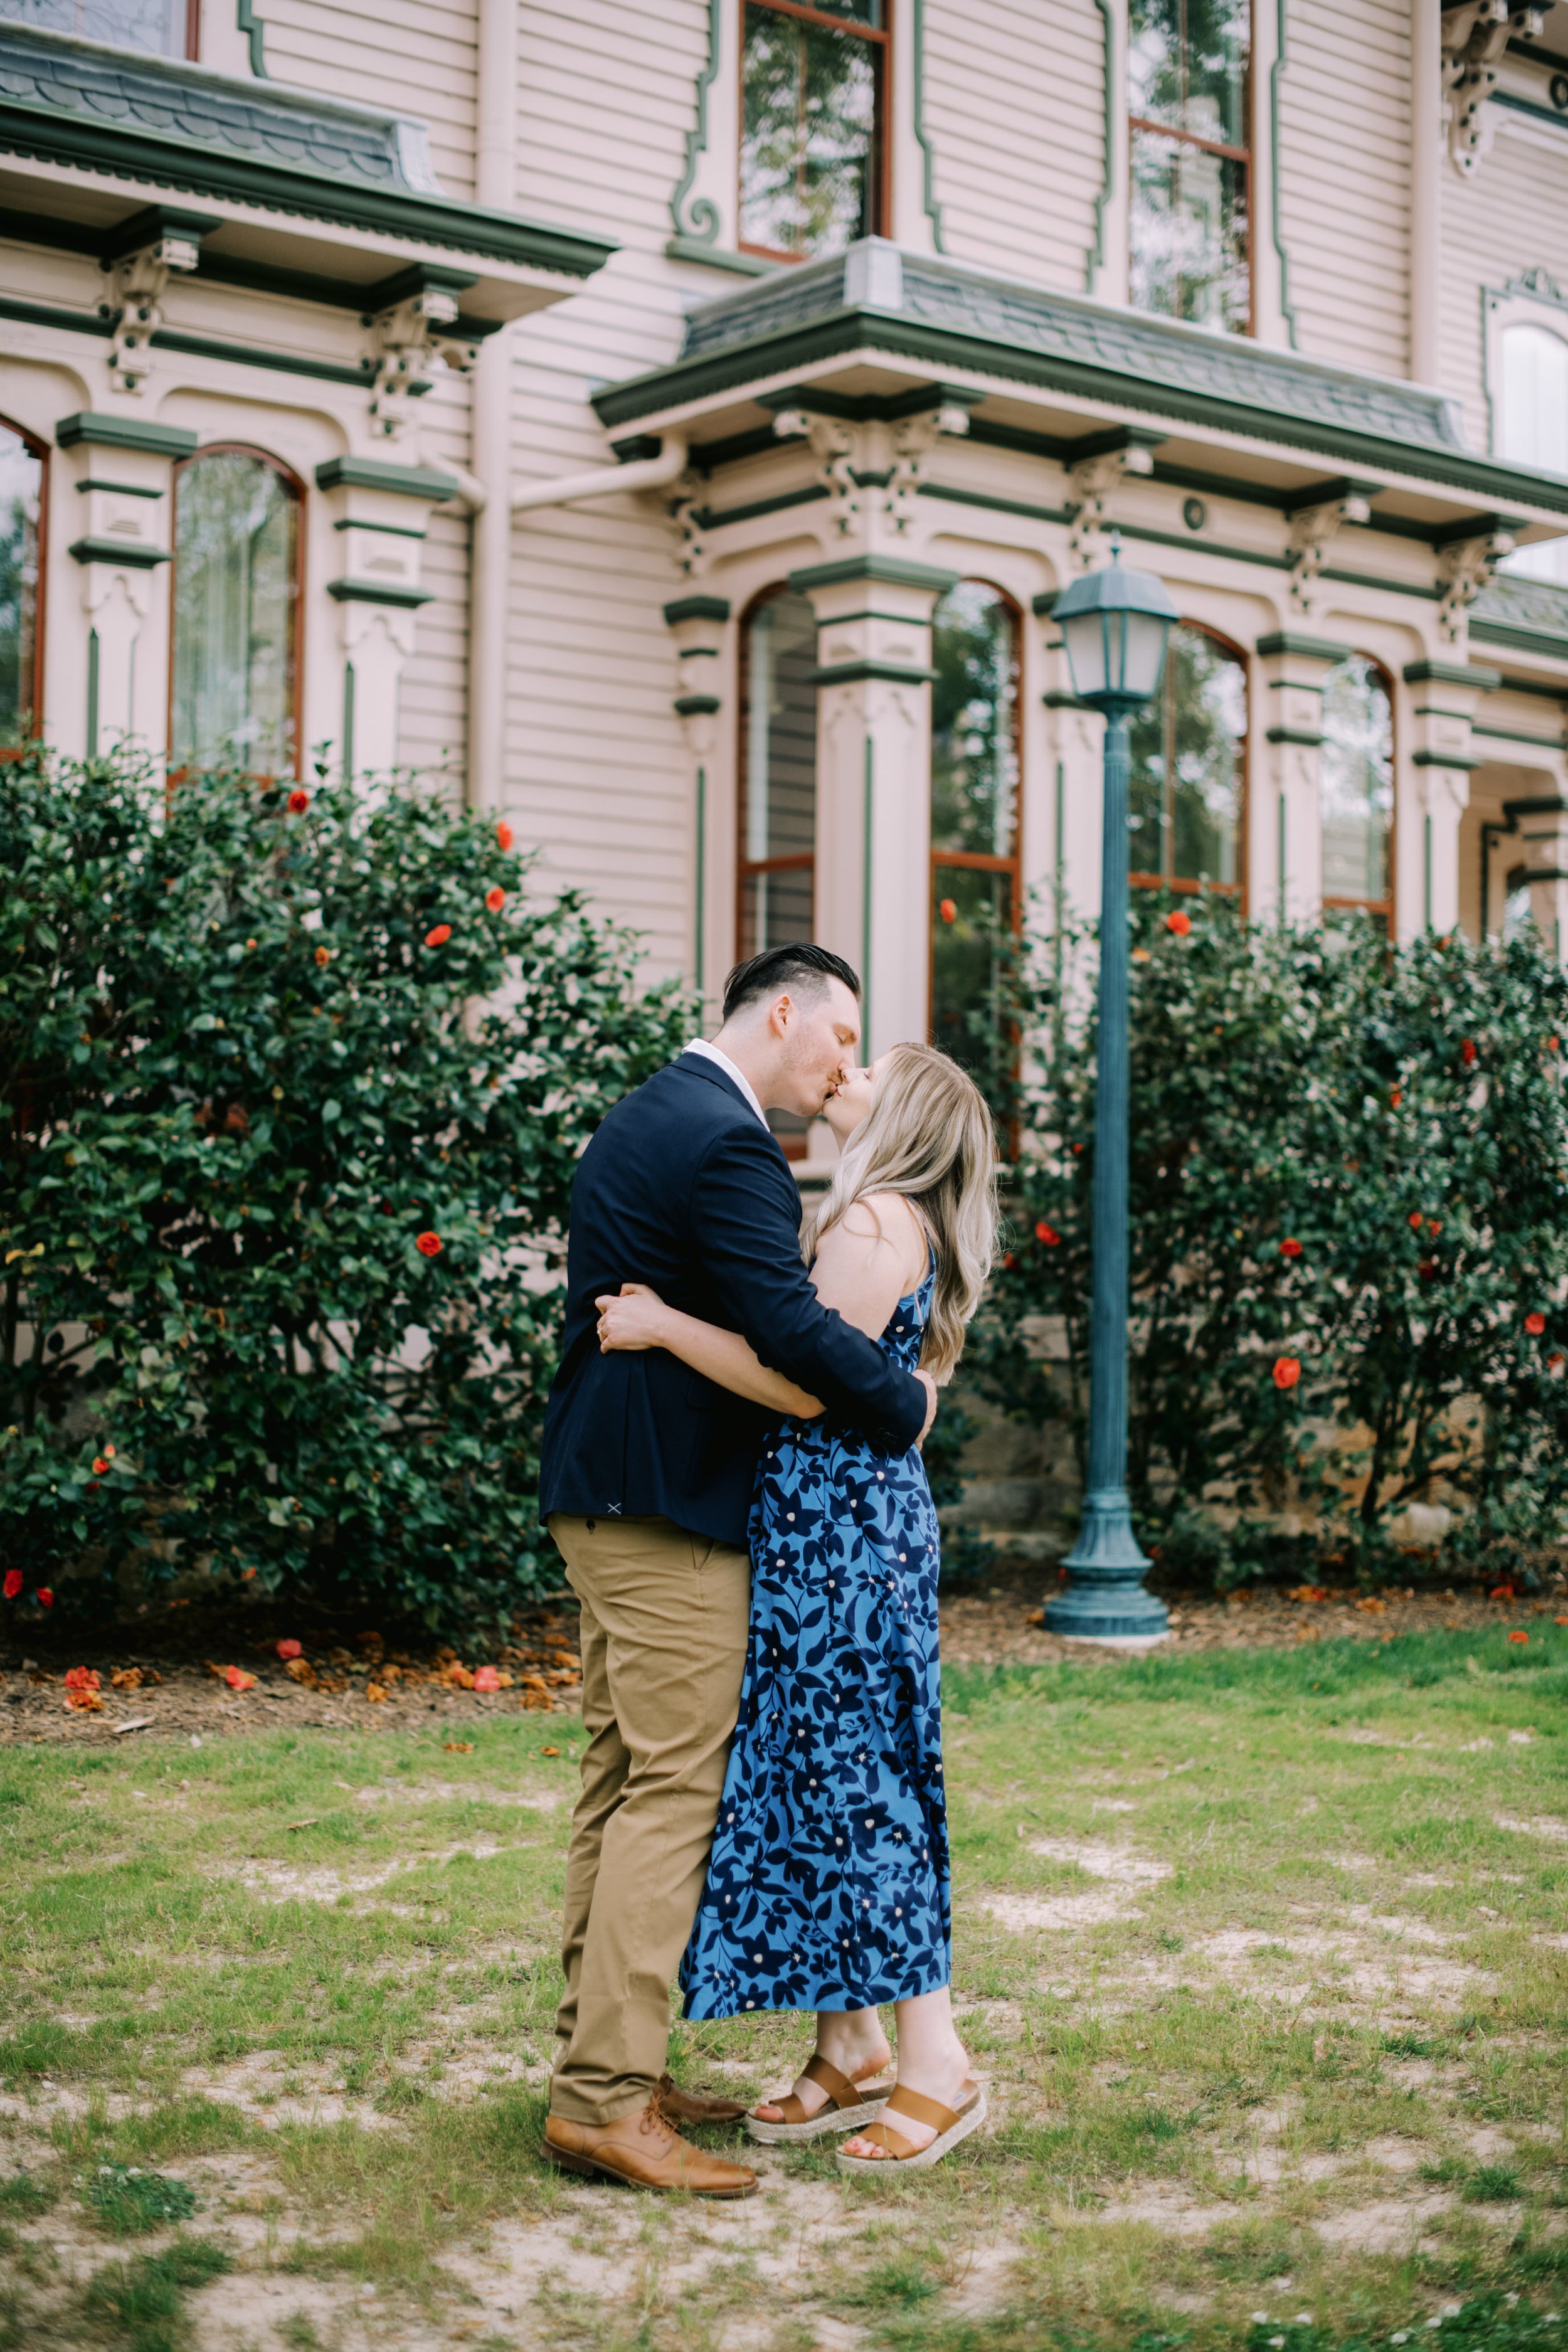 Victoria and Cody Kiss Raleigh NC Engagement Photos in Historic Oakwood Neighborhood Fancy This Photography